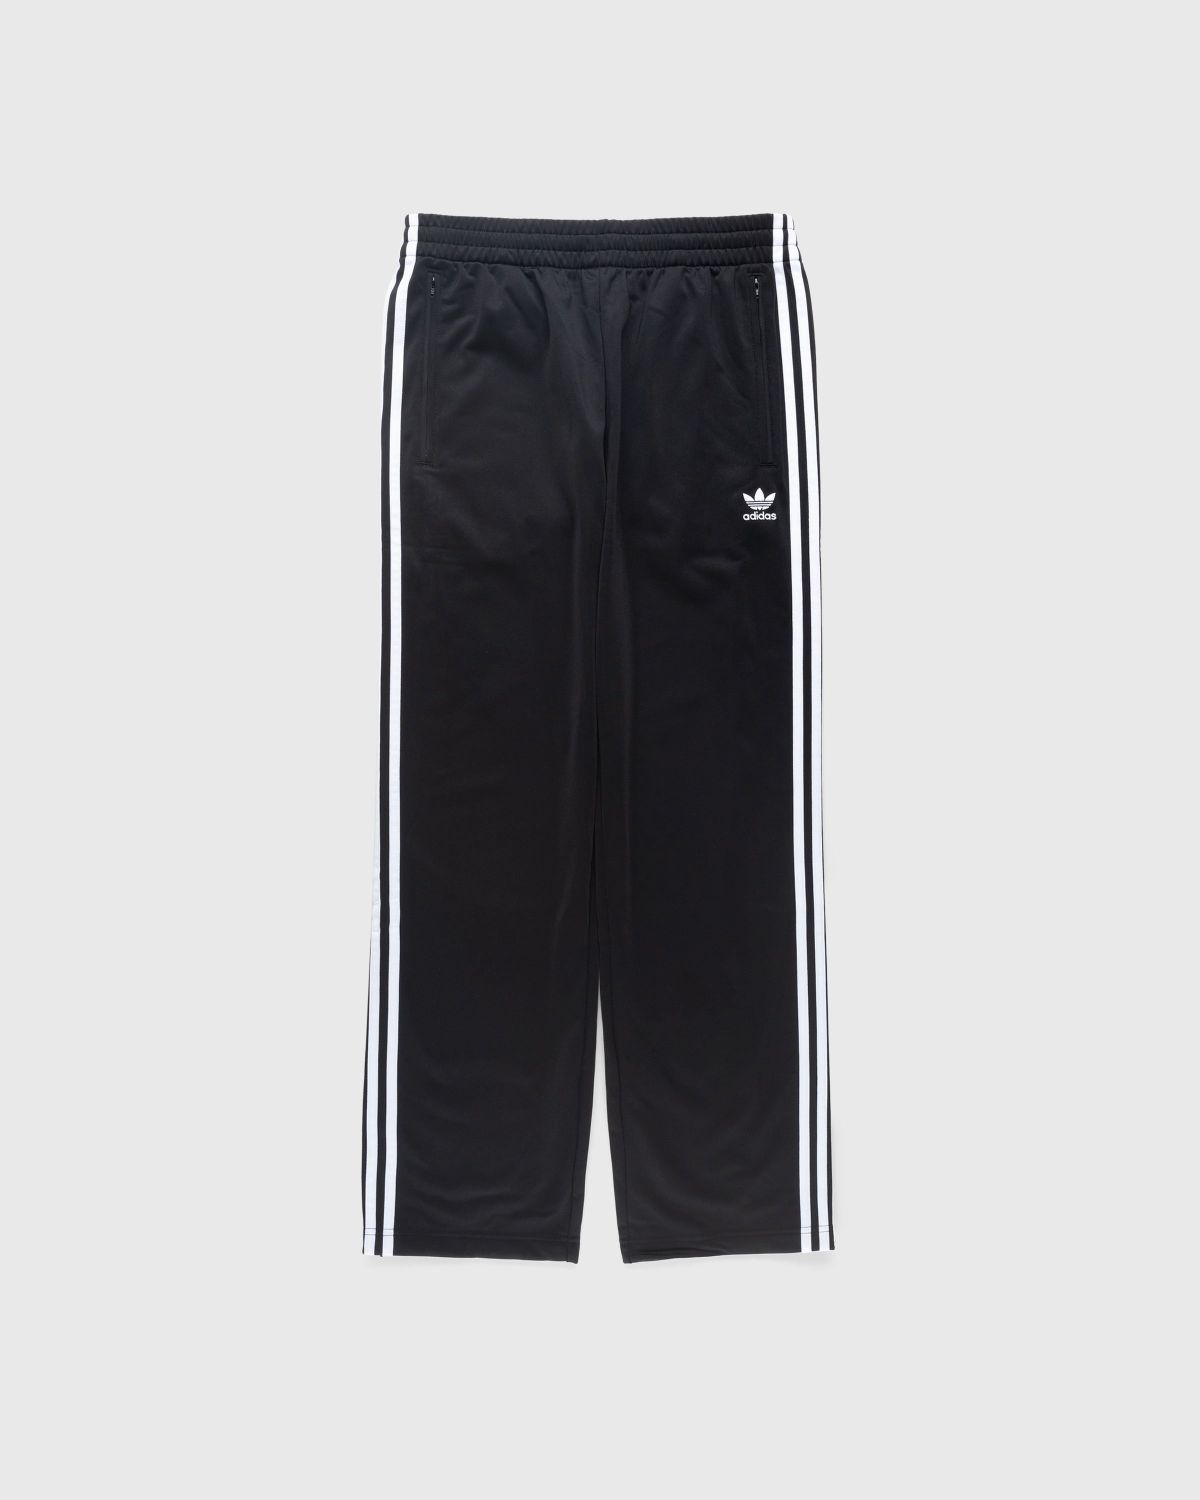 Adidas 90's Archive Track Pant adidas